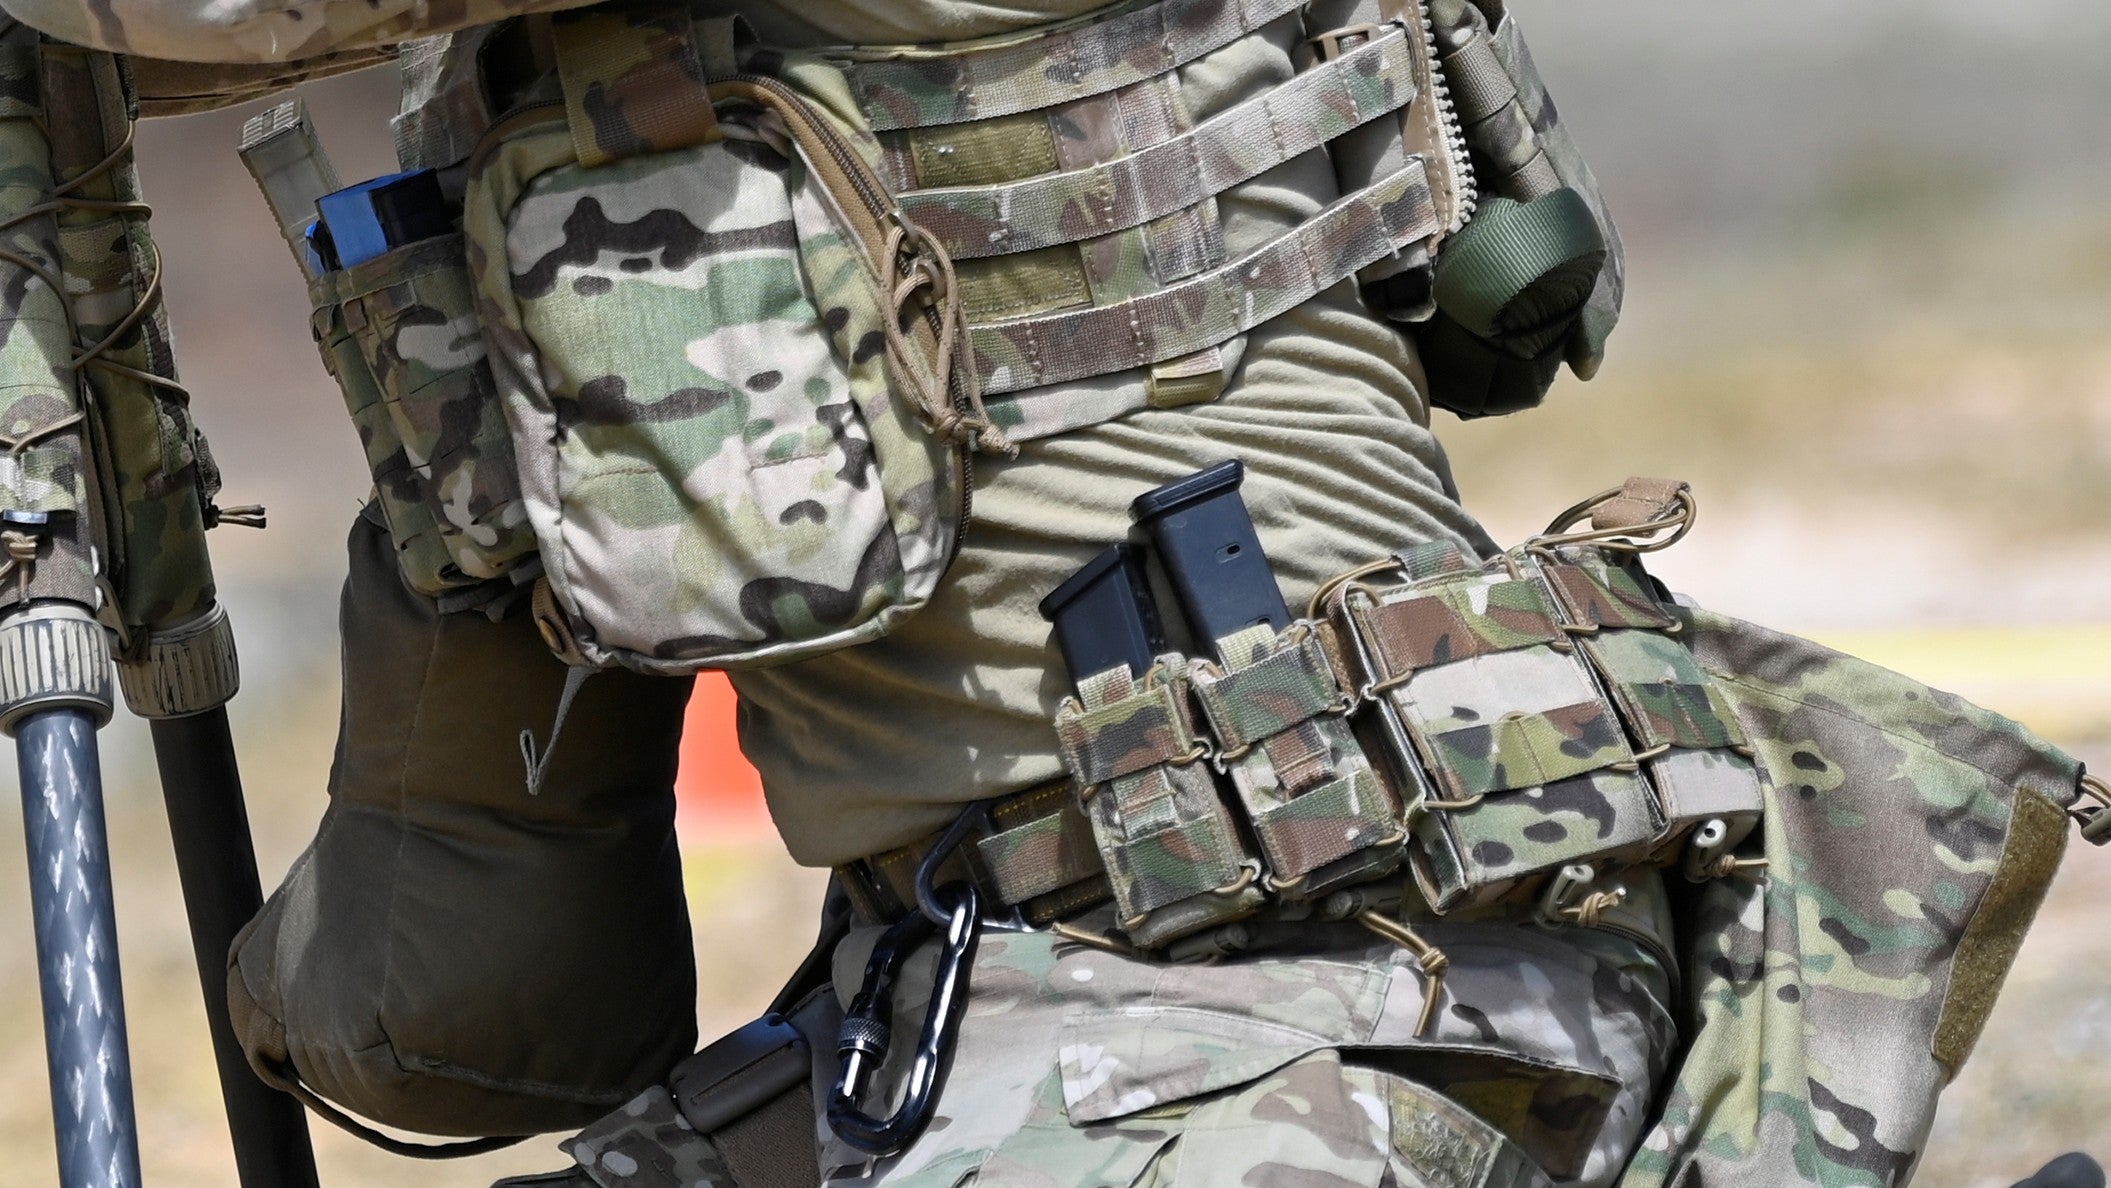 Tactical Pouches | Offbase Supply Co. – Tagged 